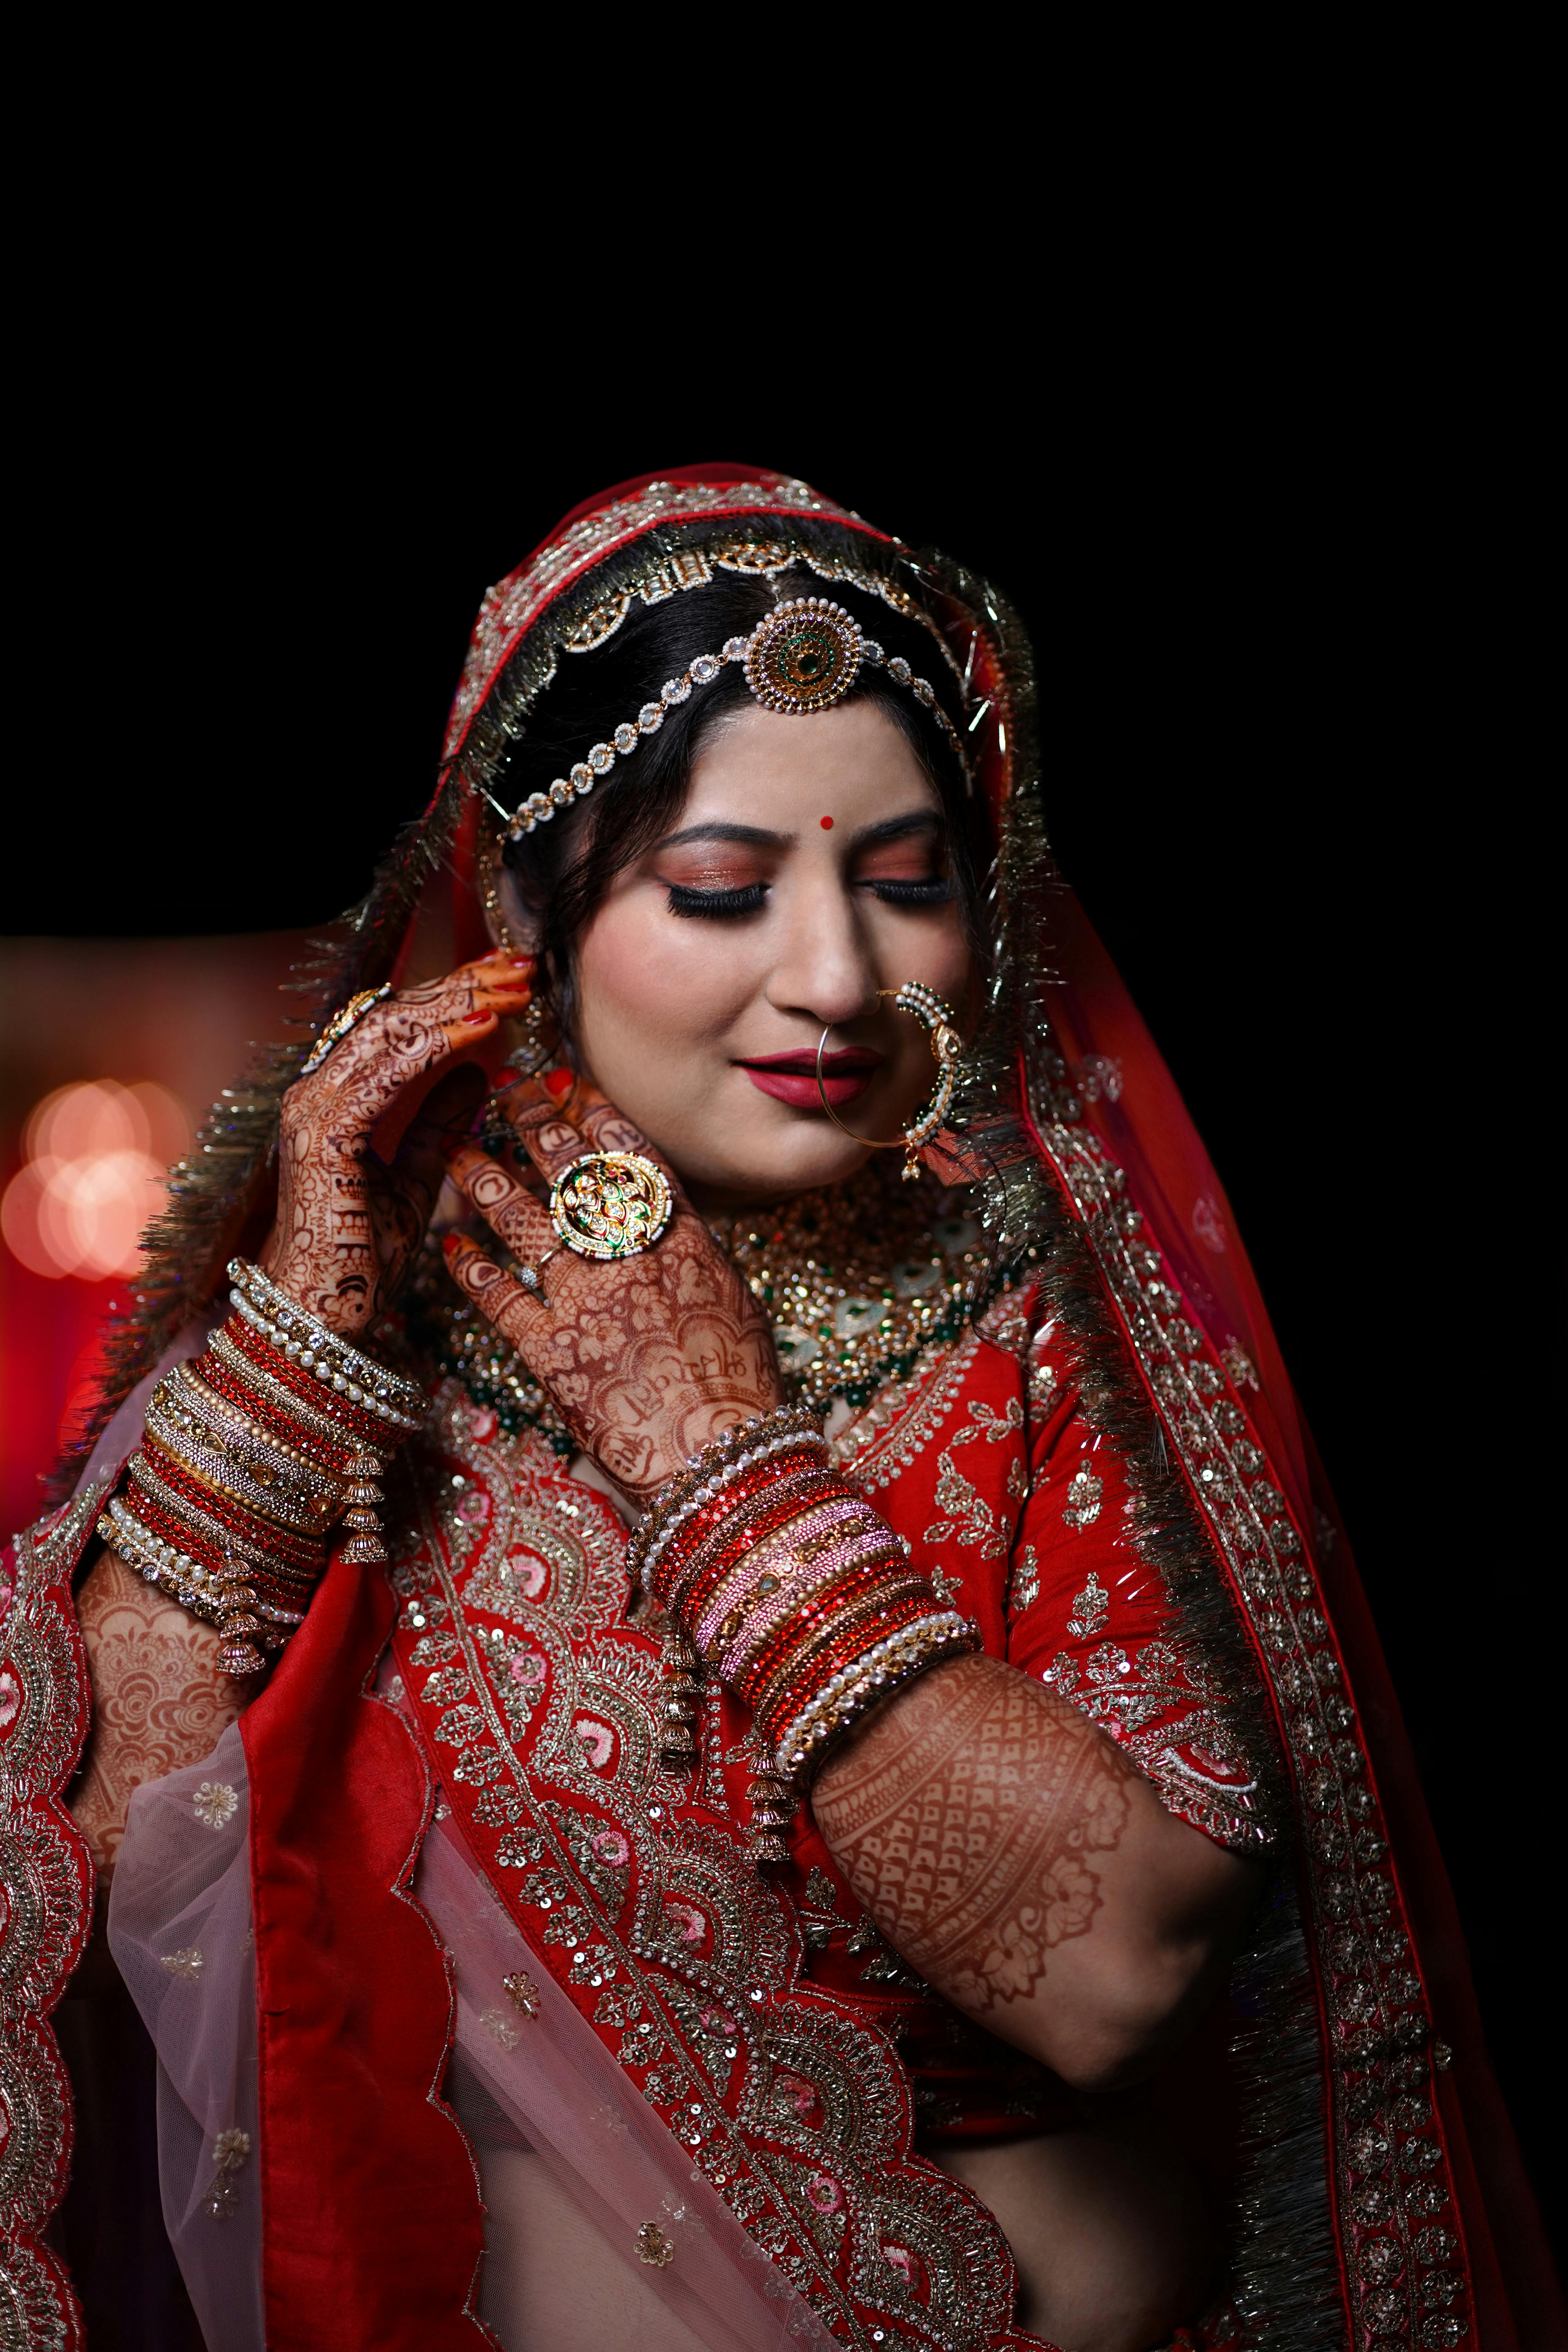 free photo of photo of an indian bride in traditional clothing